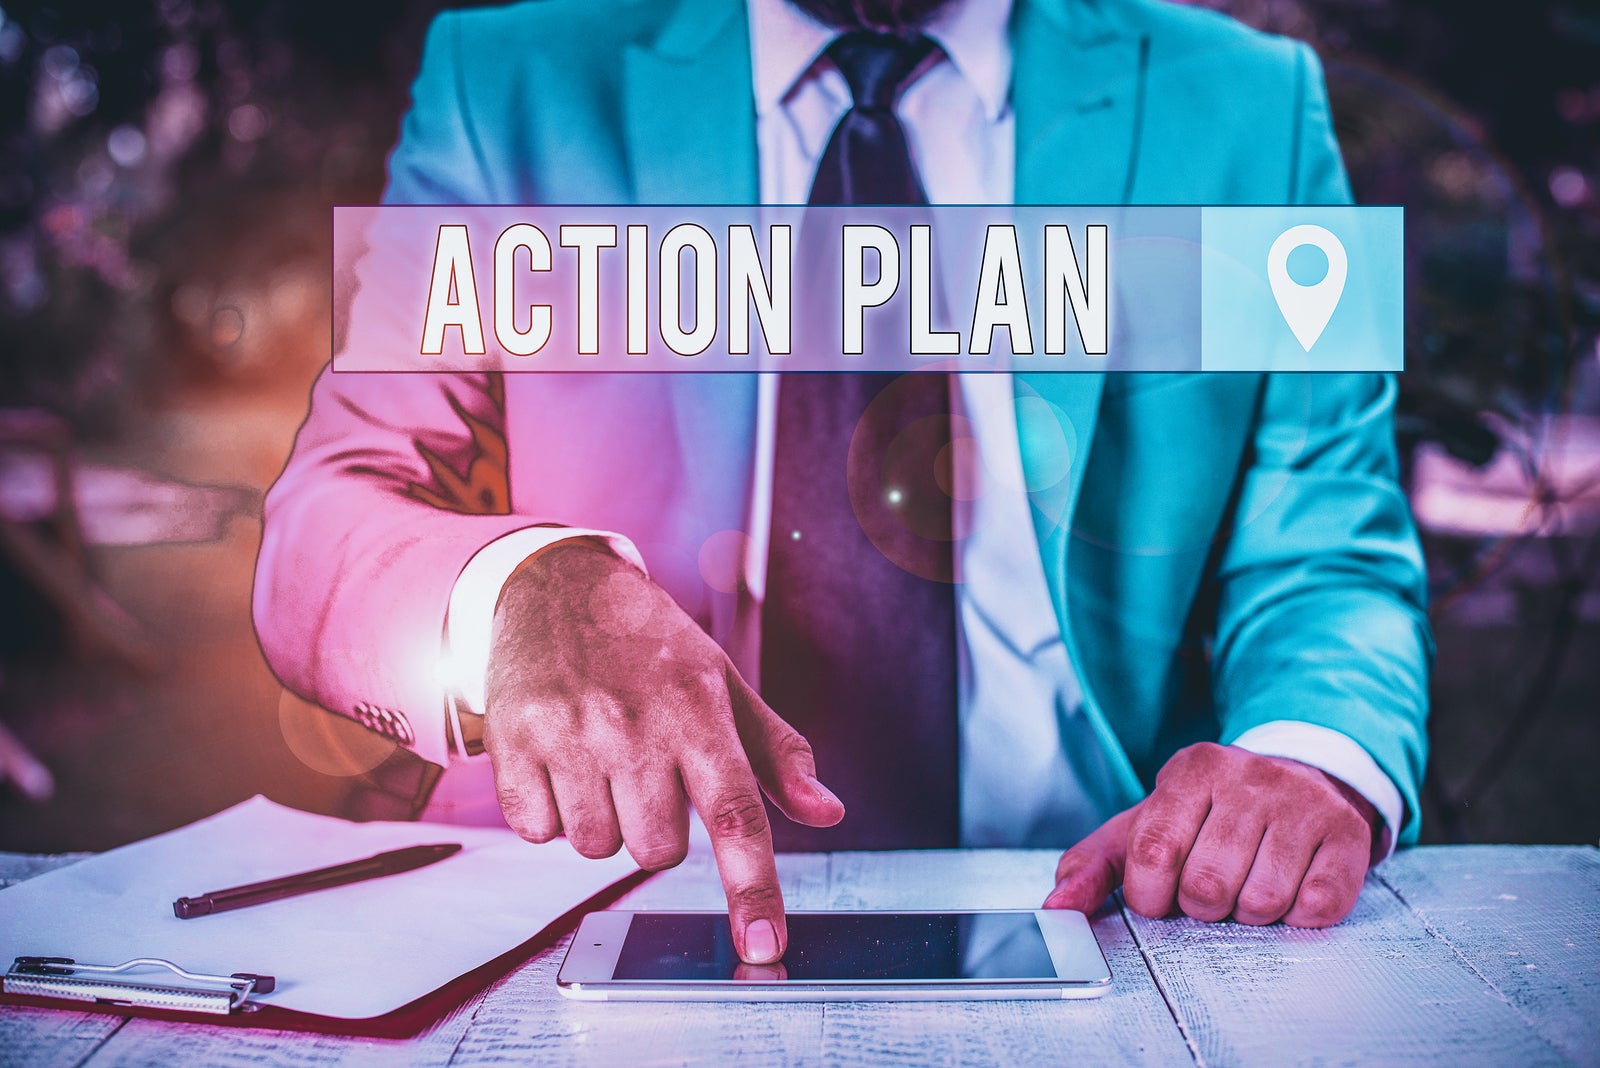 Writing note showing Action Plan. Business photo showcasing detailed plan outlining actions needed to reach goals or vision Businessman with pointing finger in front of him.